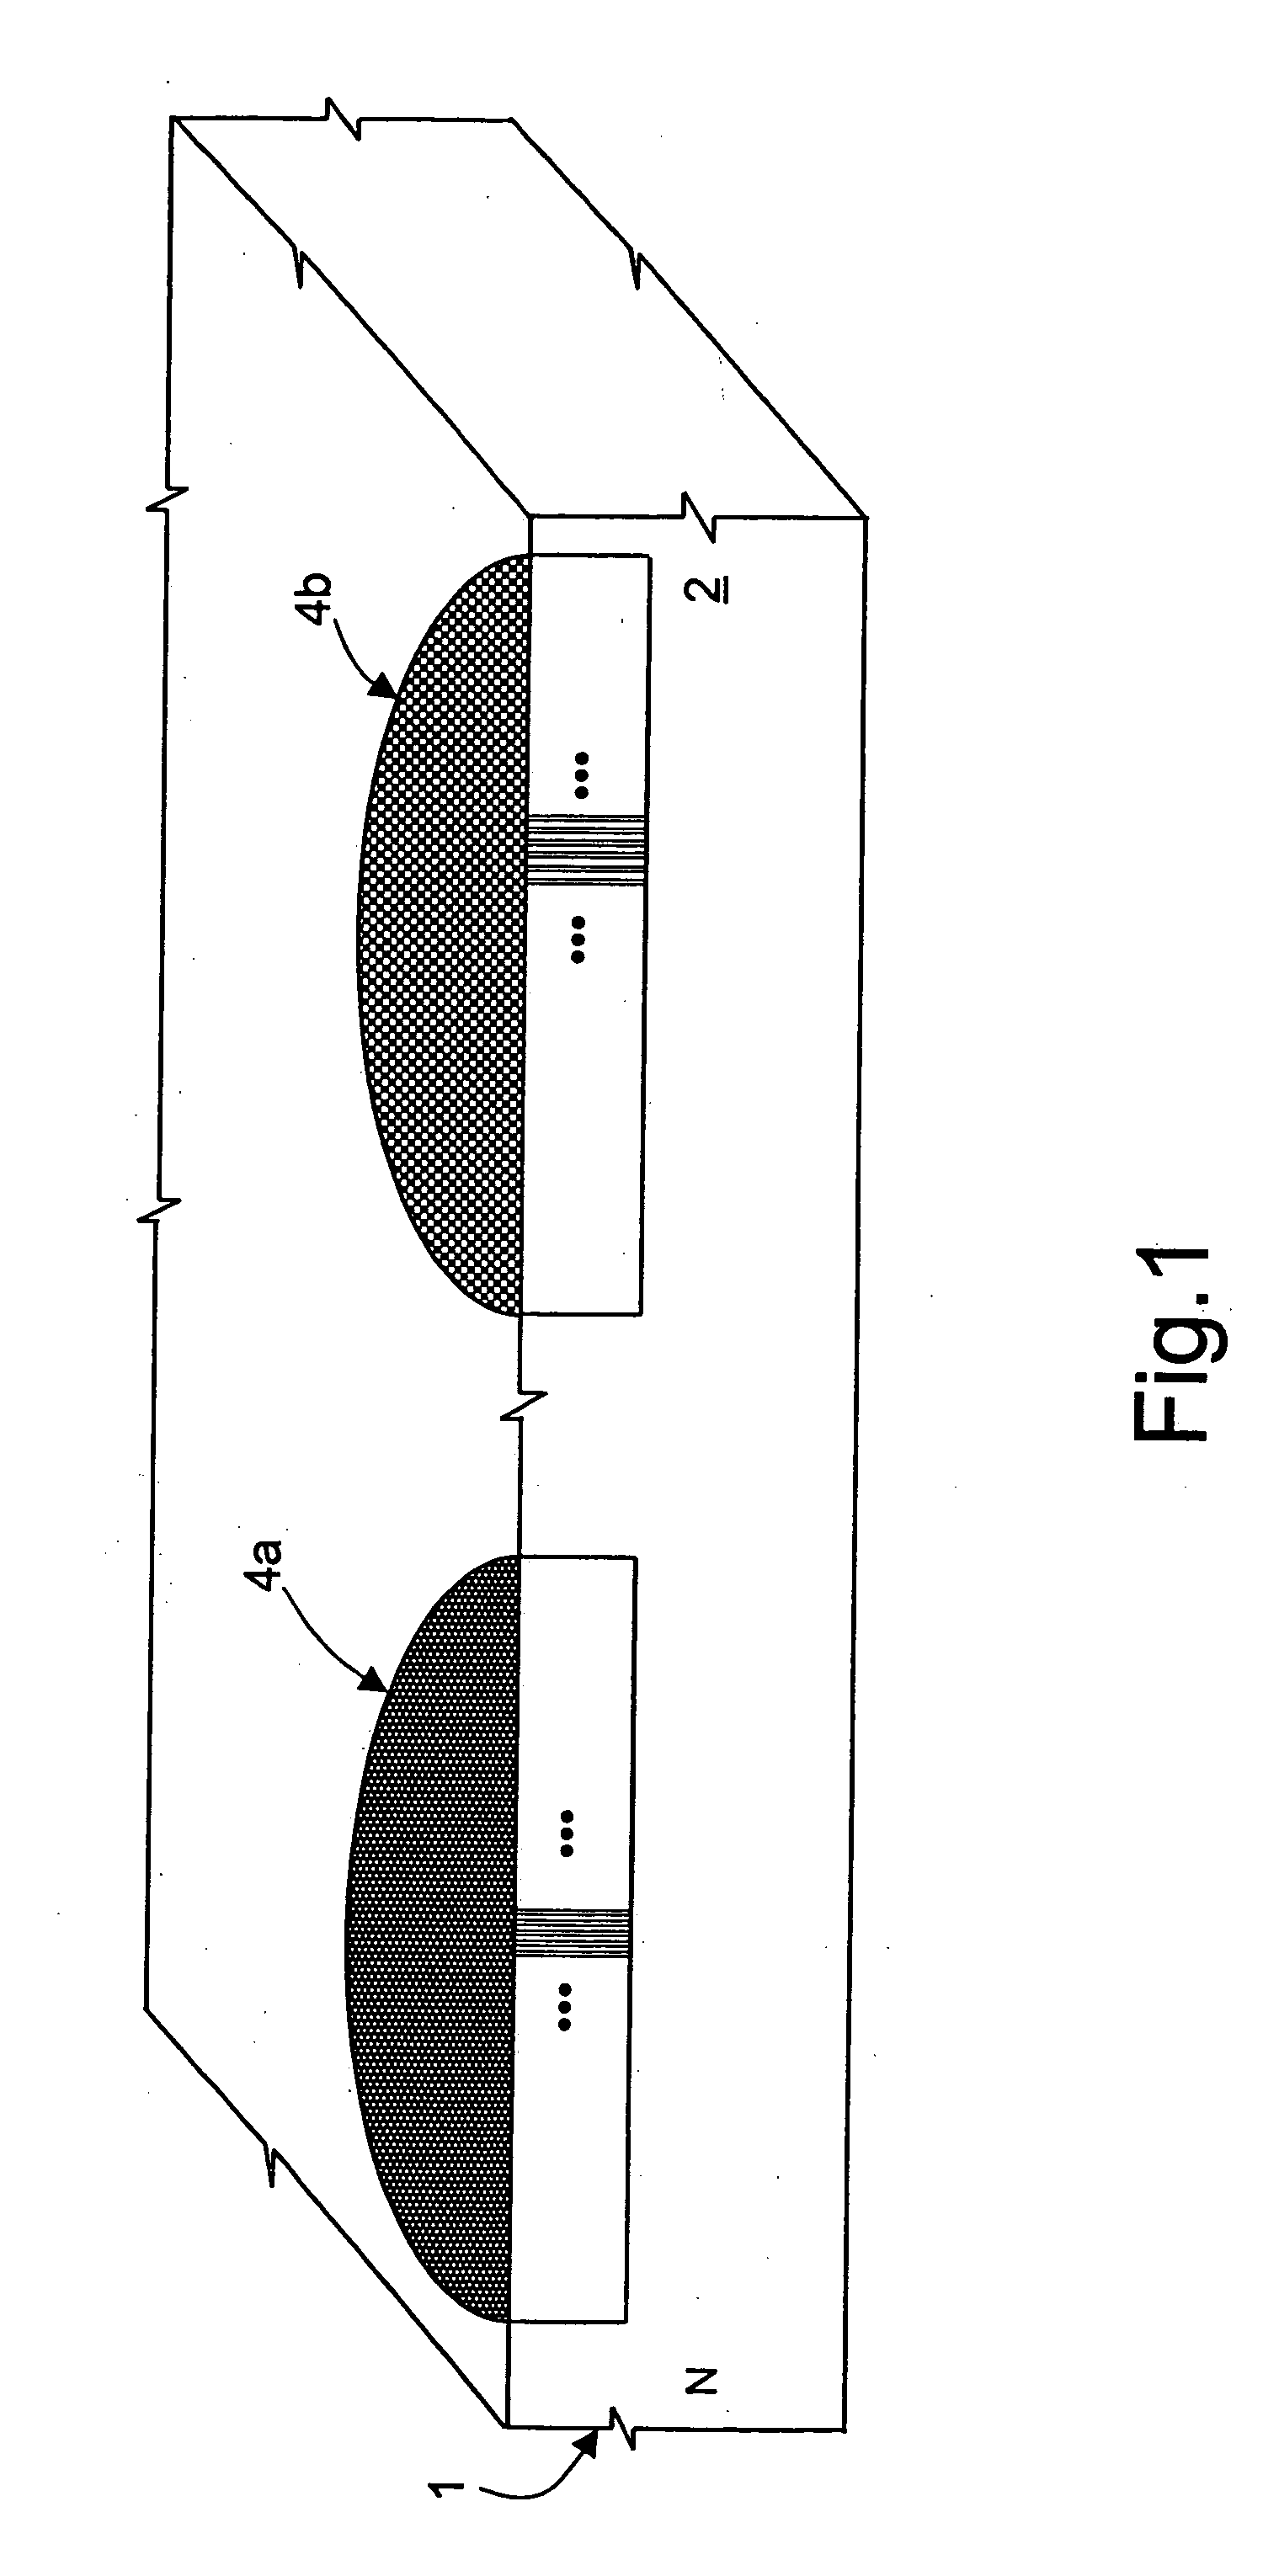 Method for manufacturing a semiconductor pressure sensor